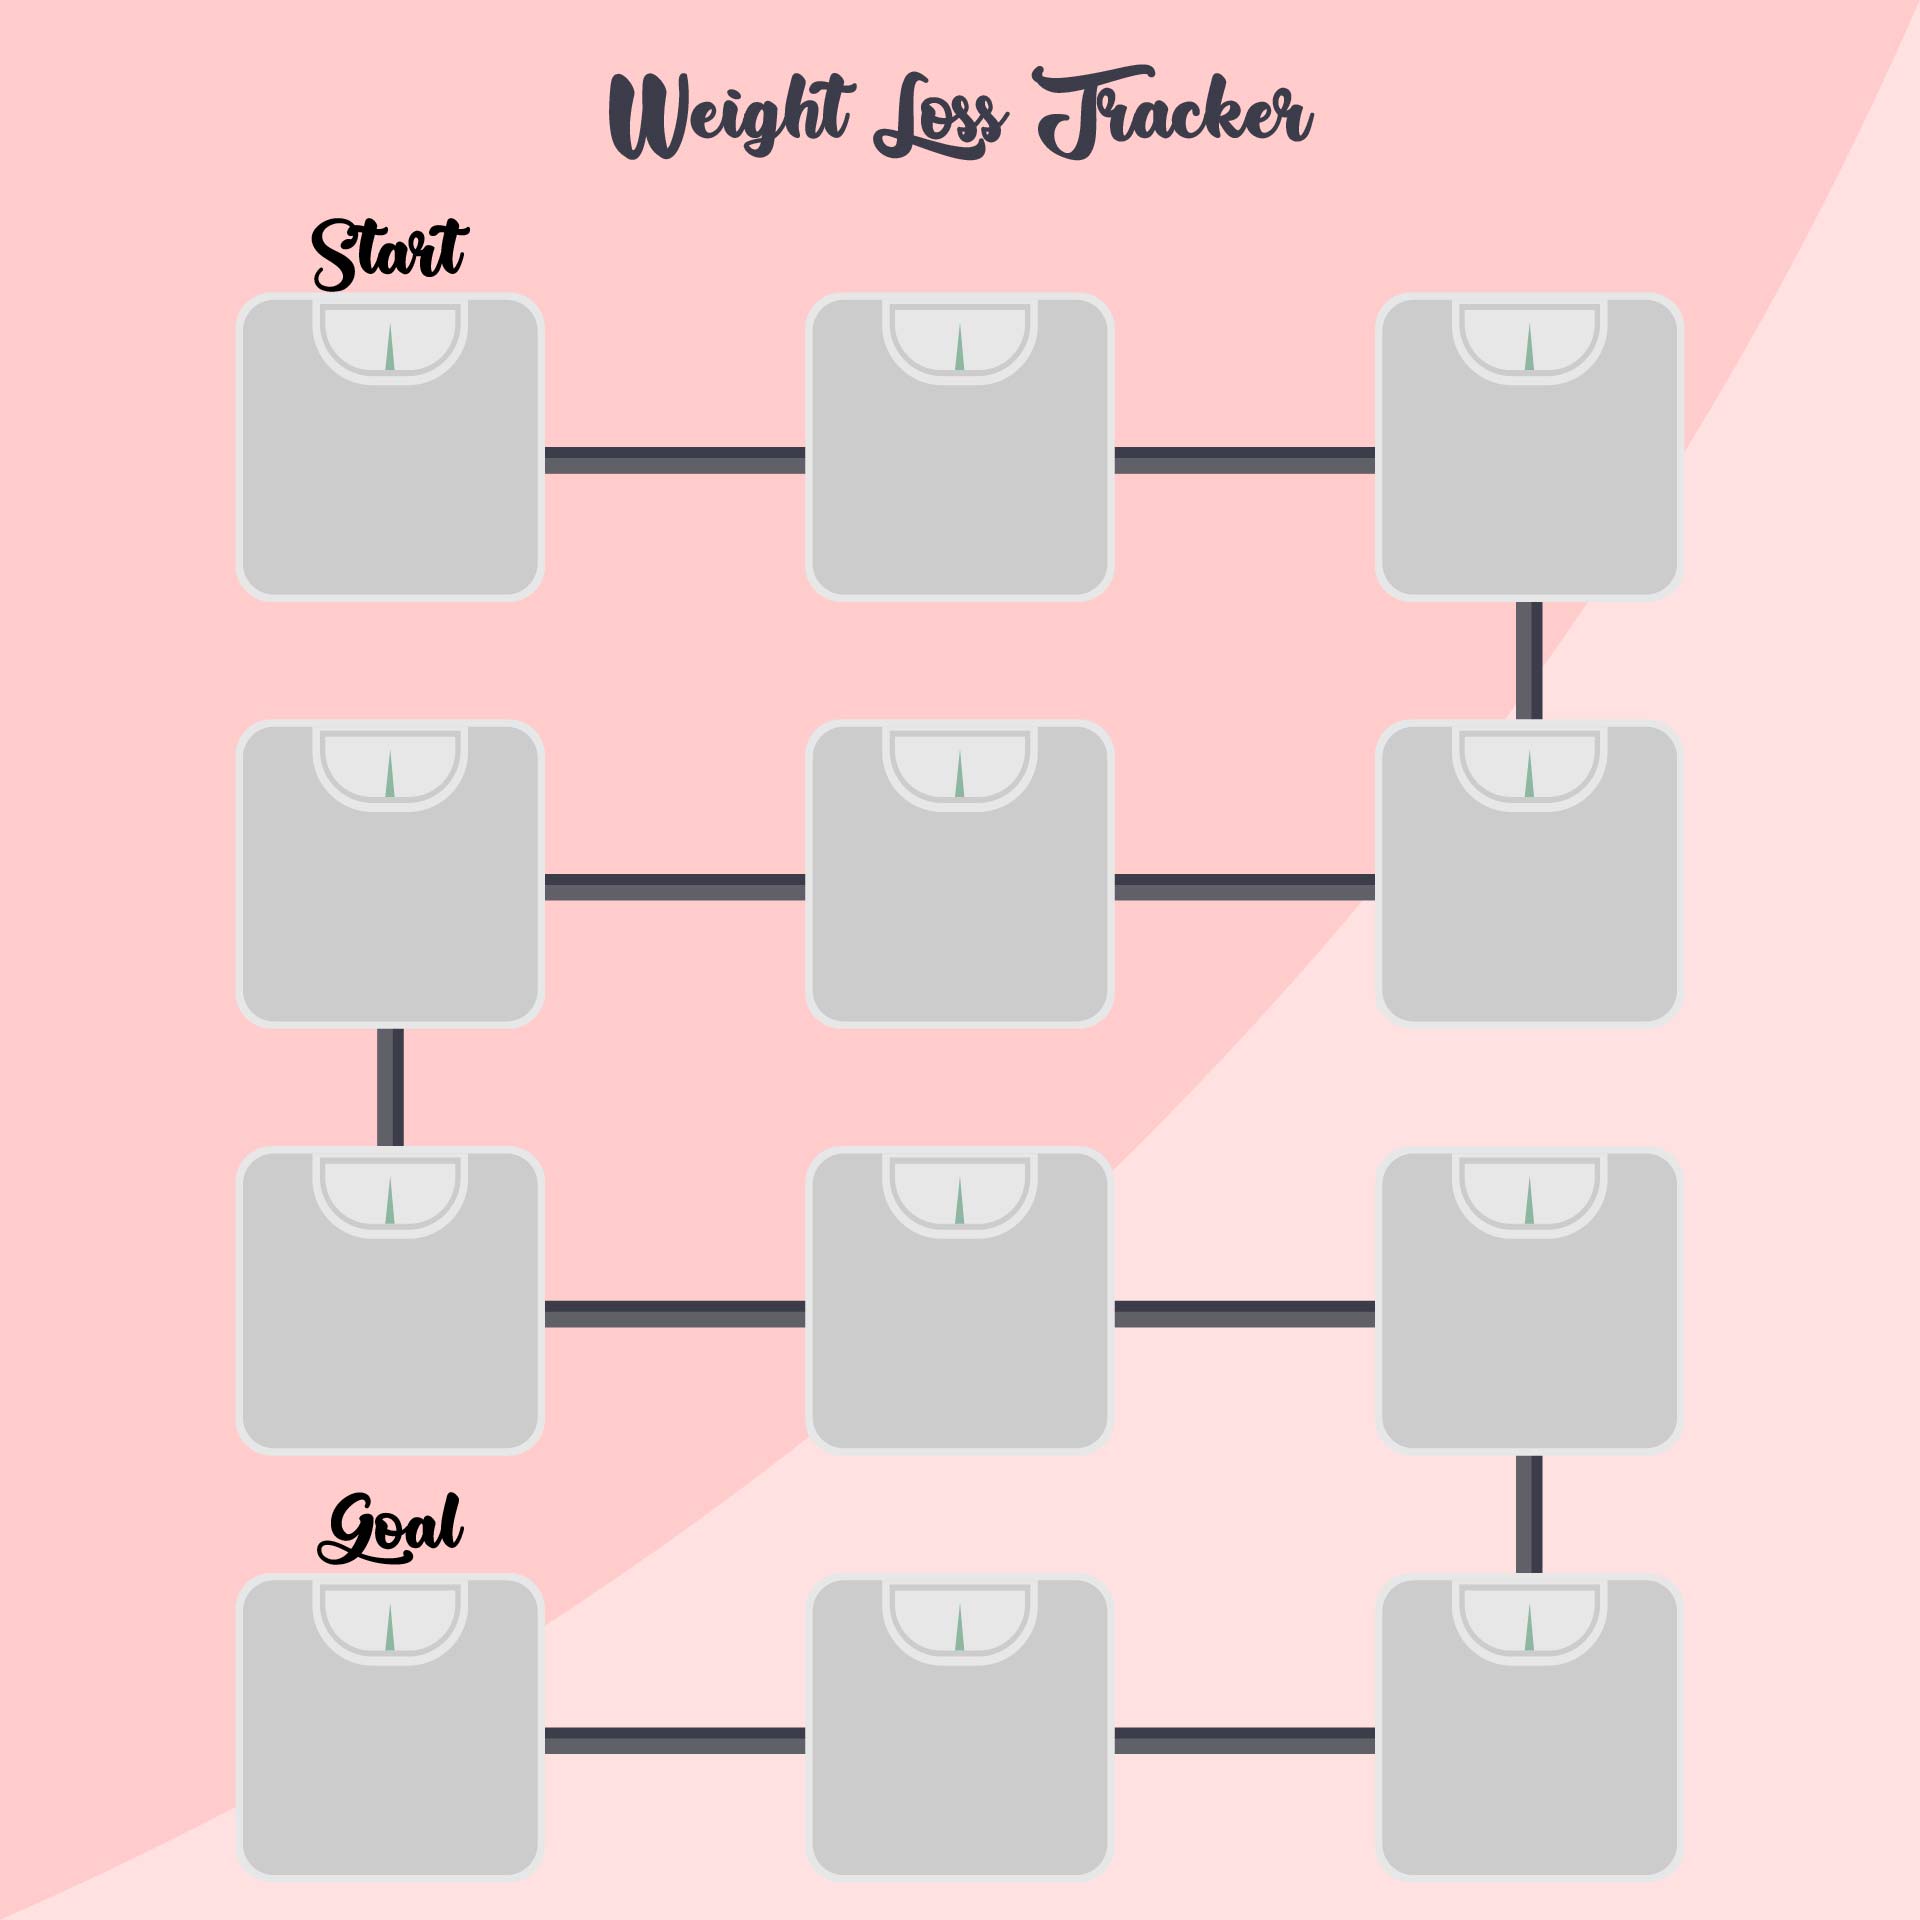 blank weekly weight loss tracker template